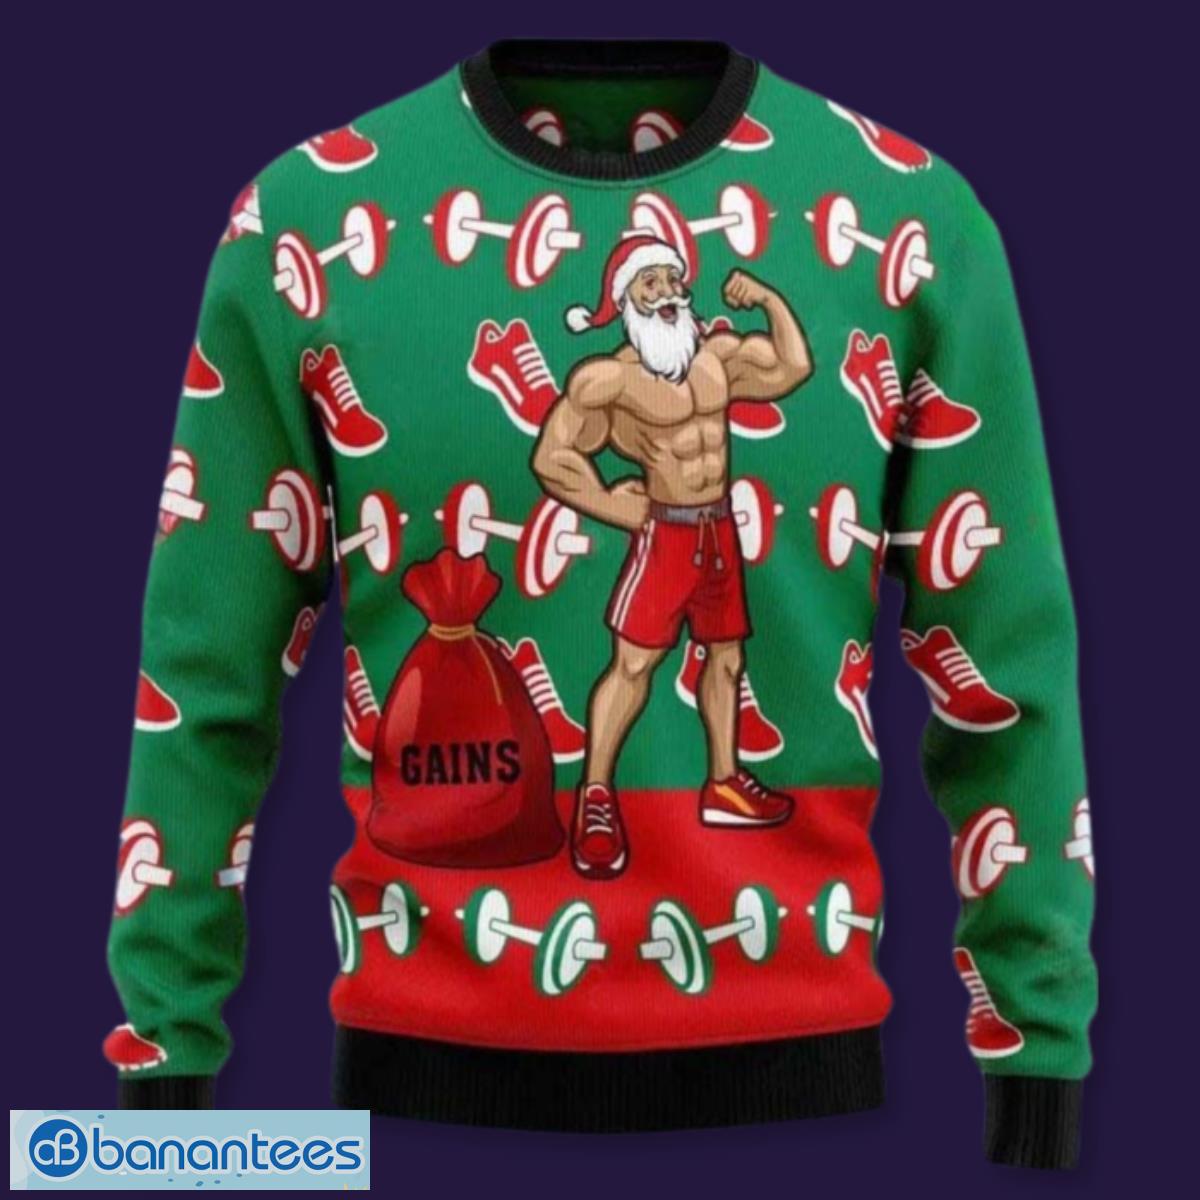 Gym lover Ugly Christmas Sweater Hot AOP Gift For Men And Women